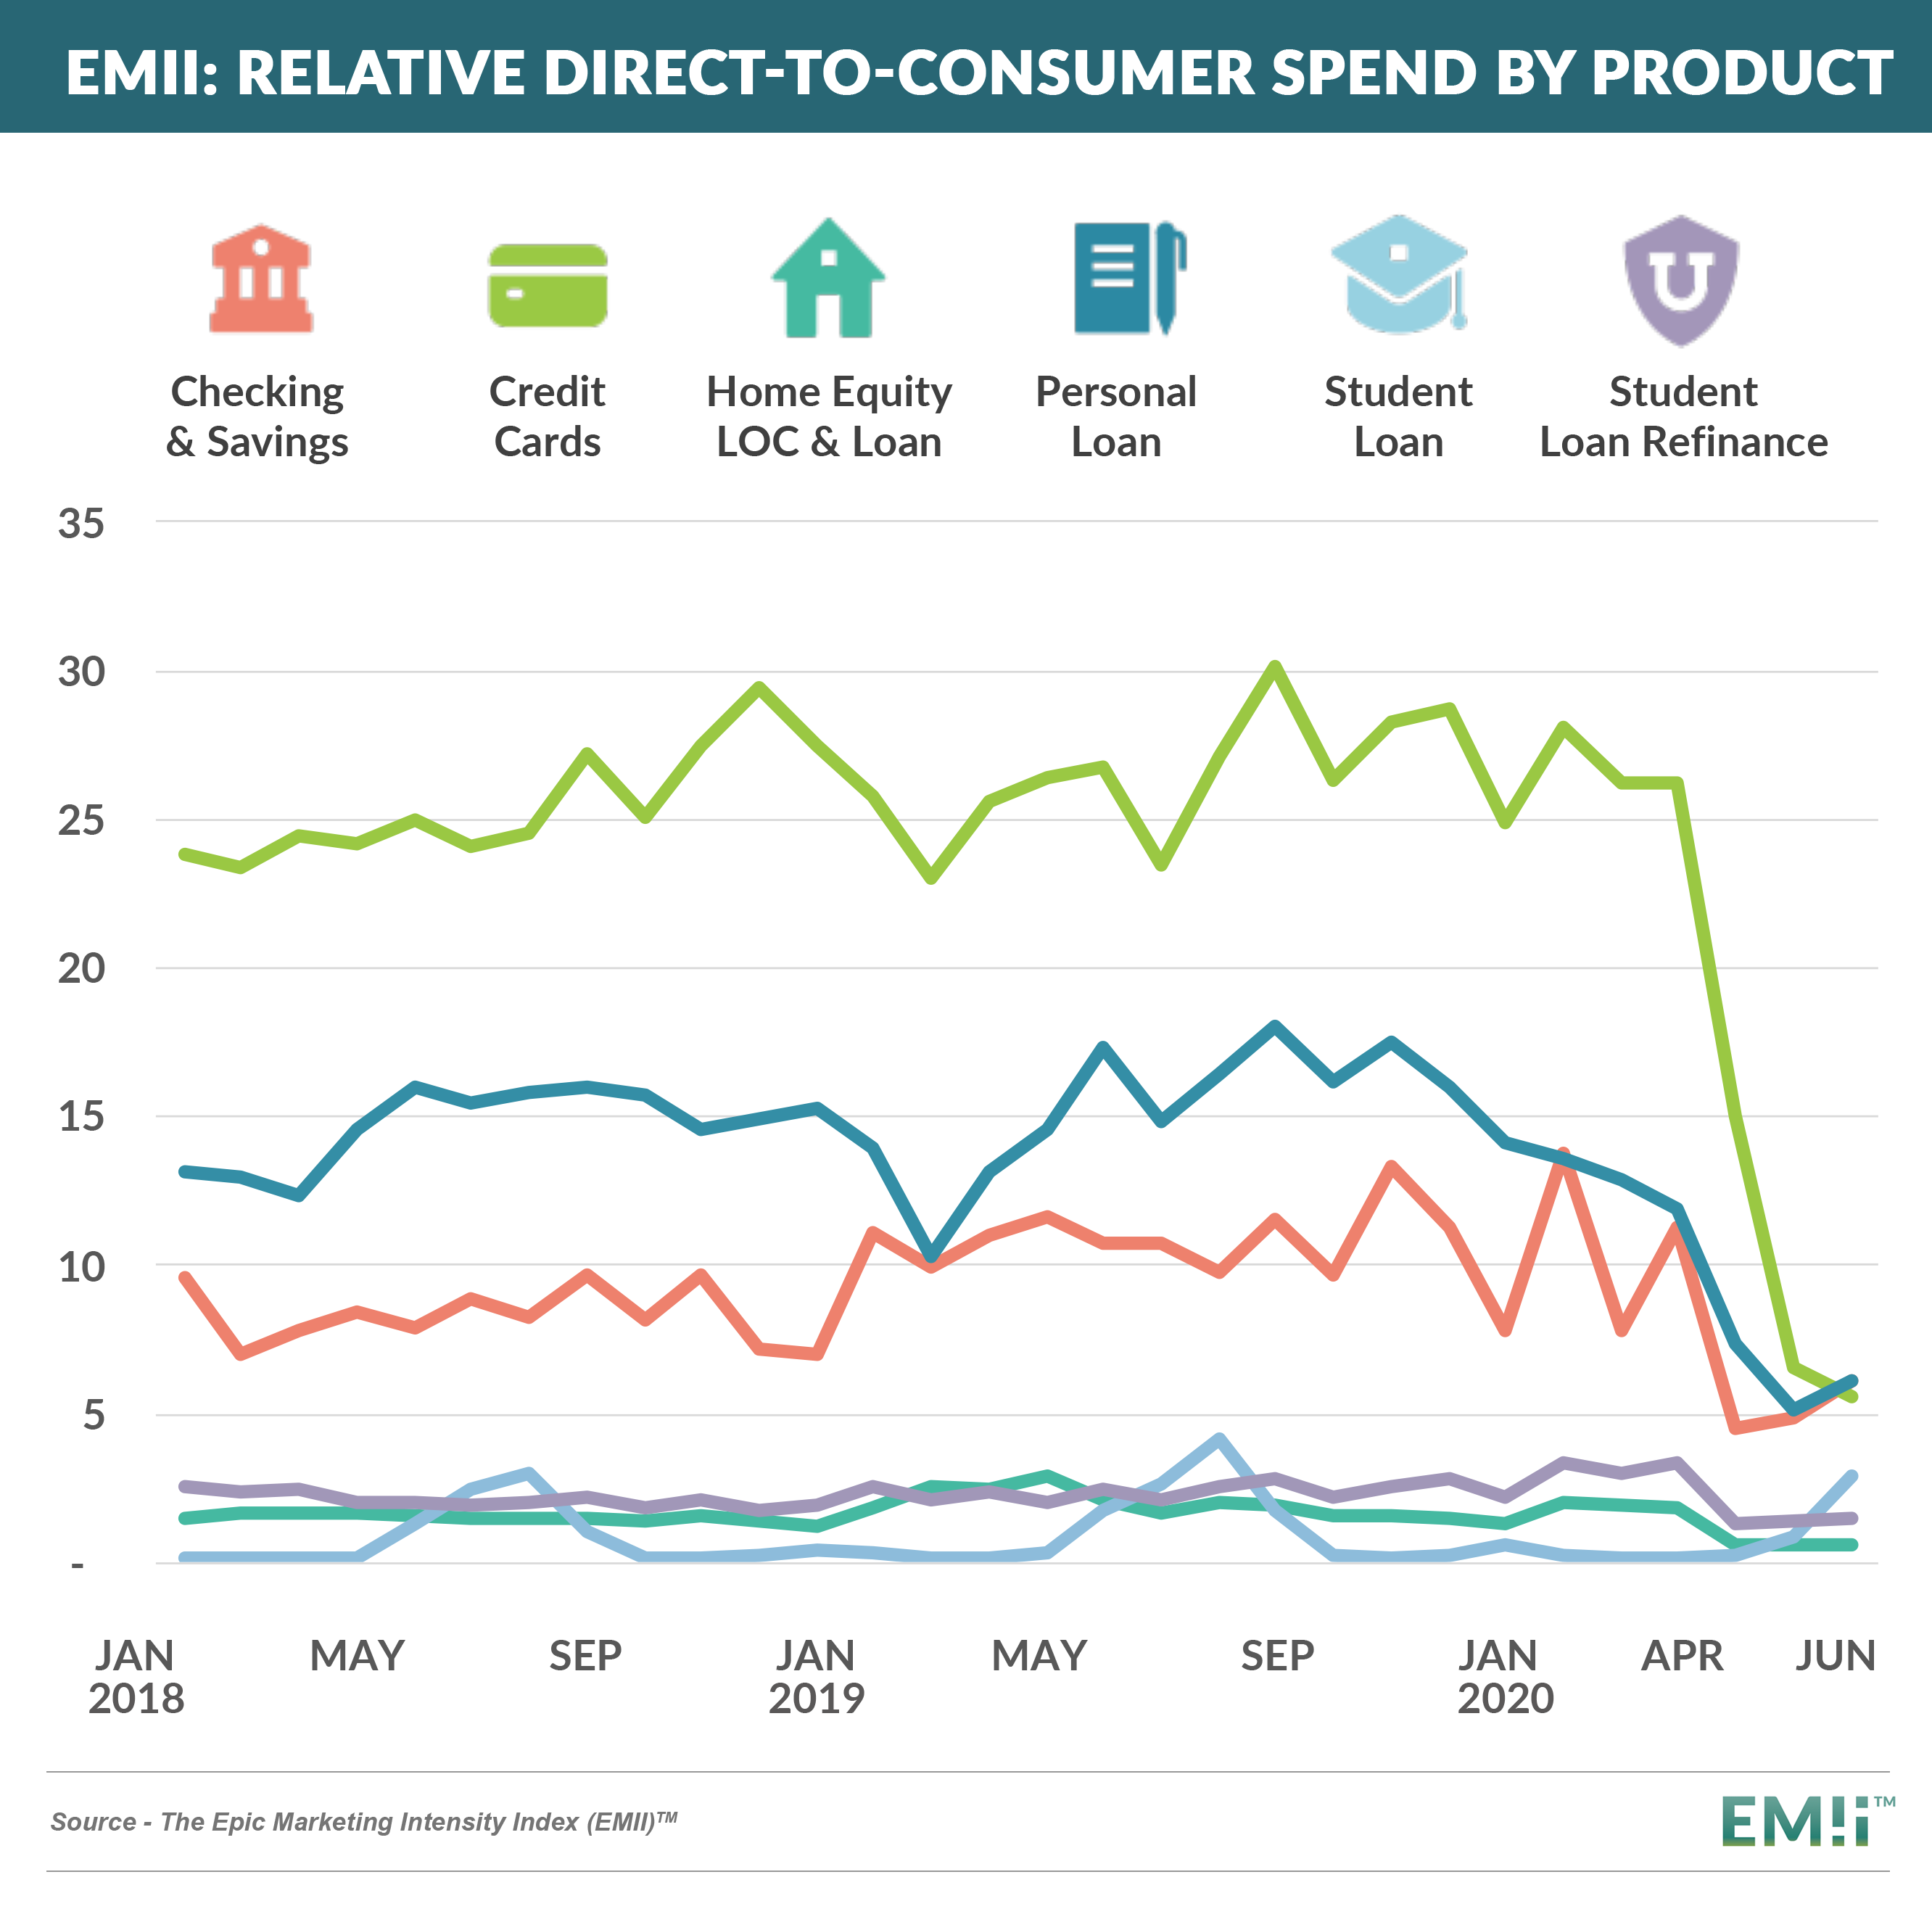 EMII_Relative_Direct-to-Consumer_Spending_by_Product